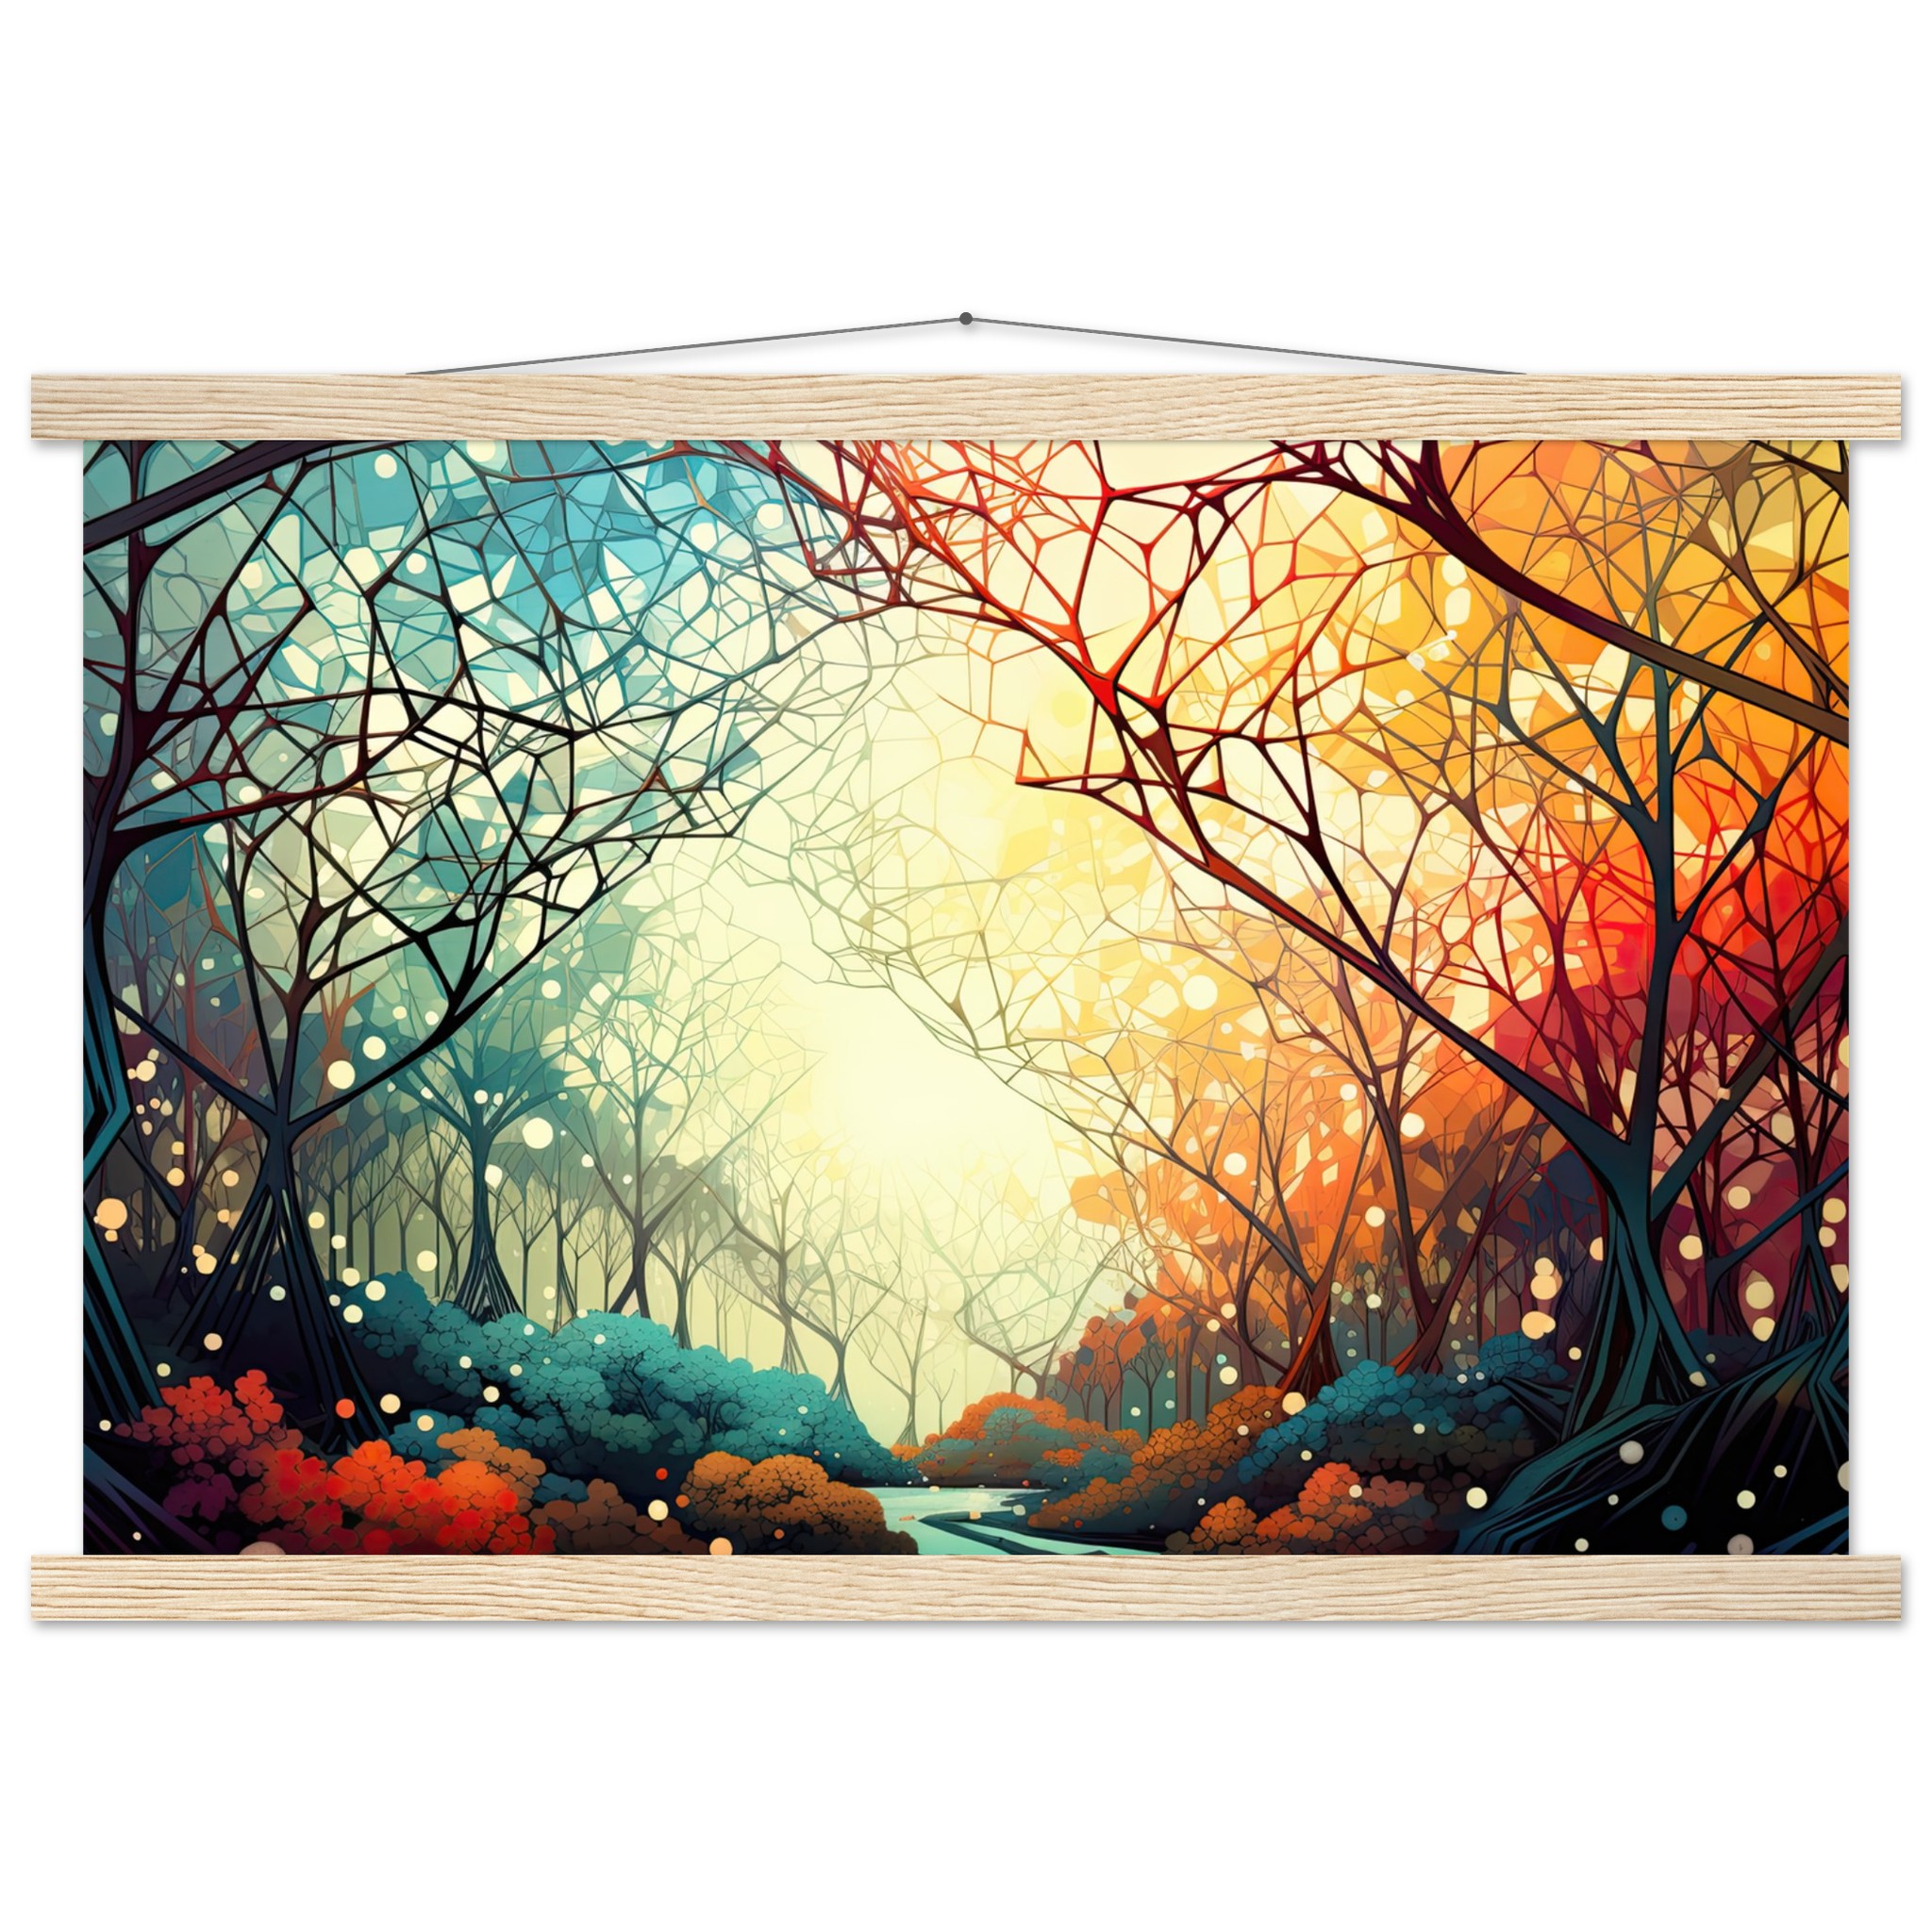 Forest Colorful Abstract Landscape Hanging Print – 40×60 cm / 16×24″, Natural wood wall hanger